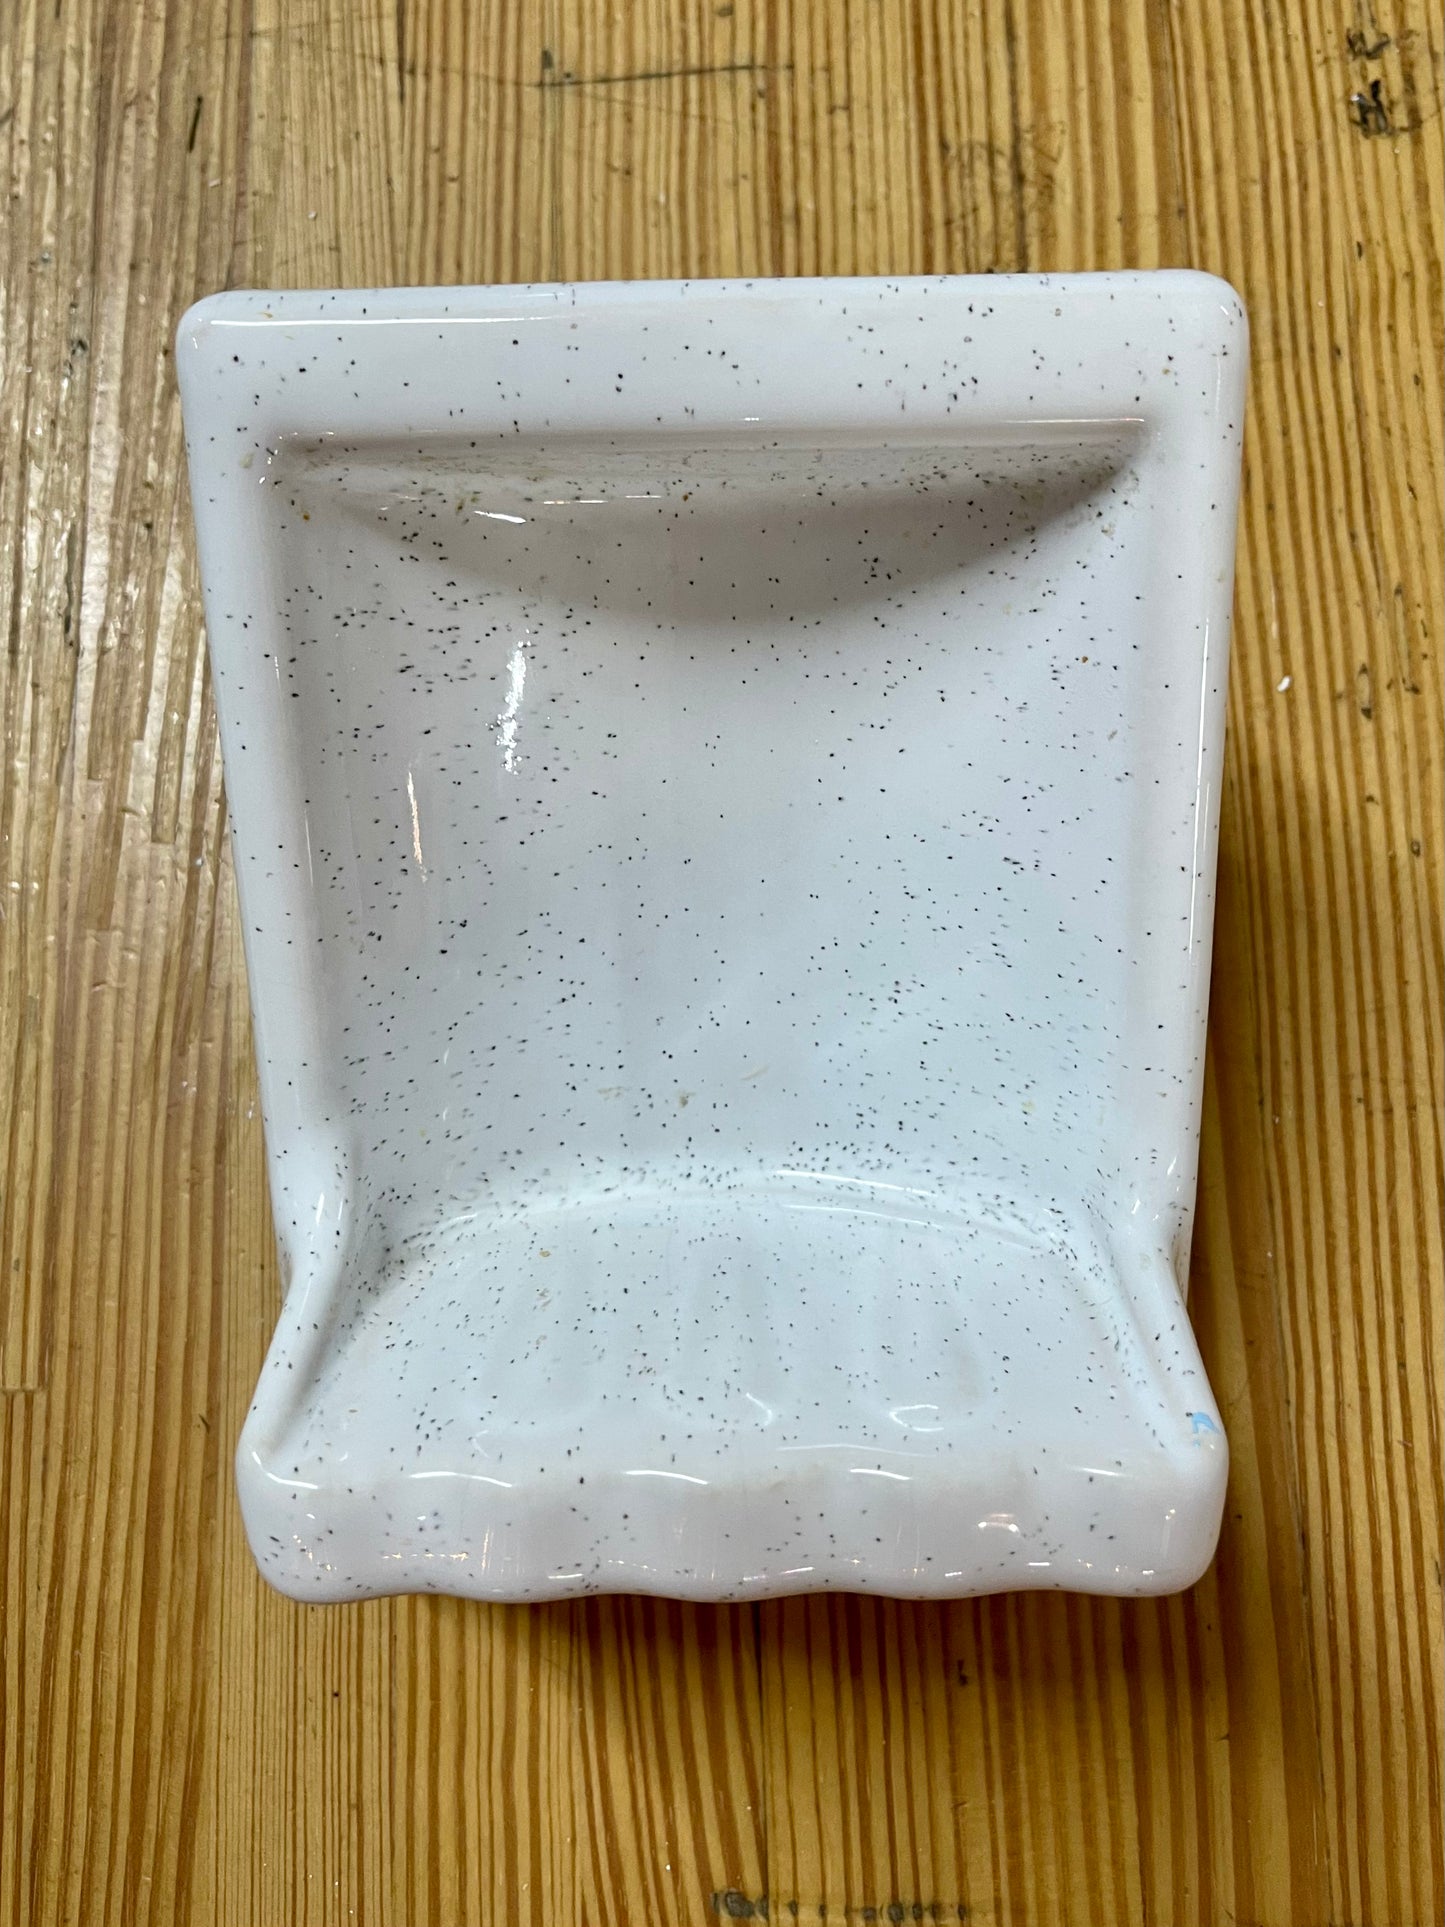 1960s White with Black Speckled Soap Dish